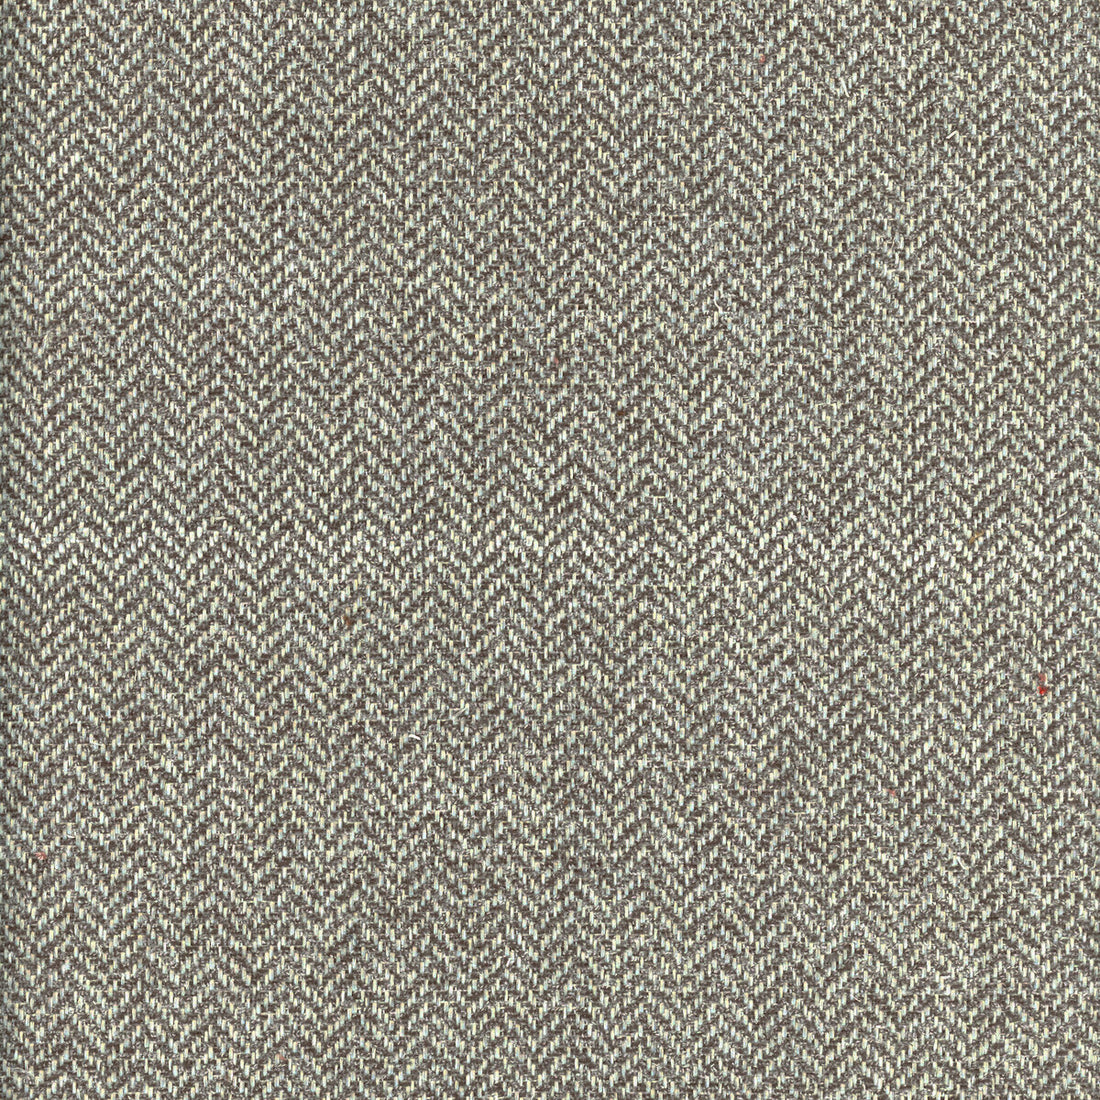 Nevada fabric in granite color - pattern AM100329.21.0 - by Kravet Couture in the Andrew Martin Canyon collection